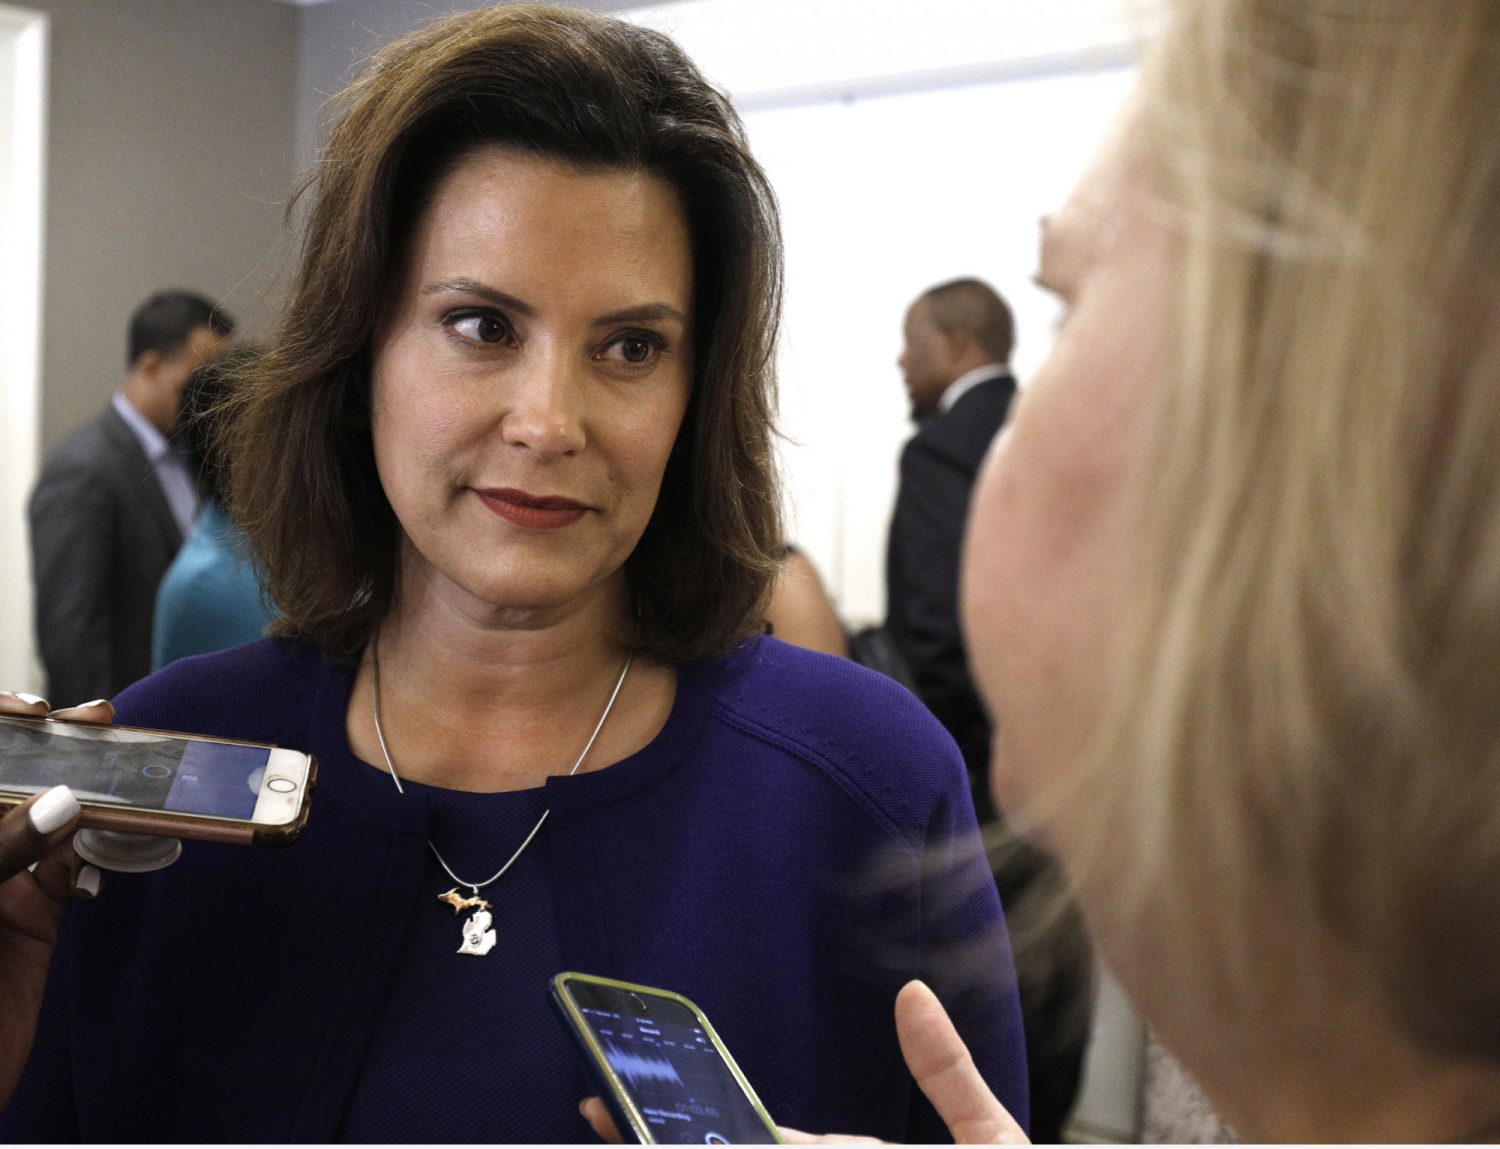 Gretchen Whitmer, then-Michigan Democratic gubernatorial nominee, speaks with reporters after a Democrat Unity Rally at the Westin Book Cadillac Hotel August 8, 2018 in Detroit, Michigan. Now governor of Michigan, Whitmer is facing widespread backlash aga